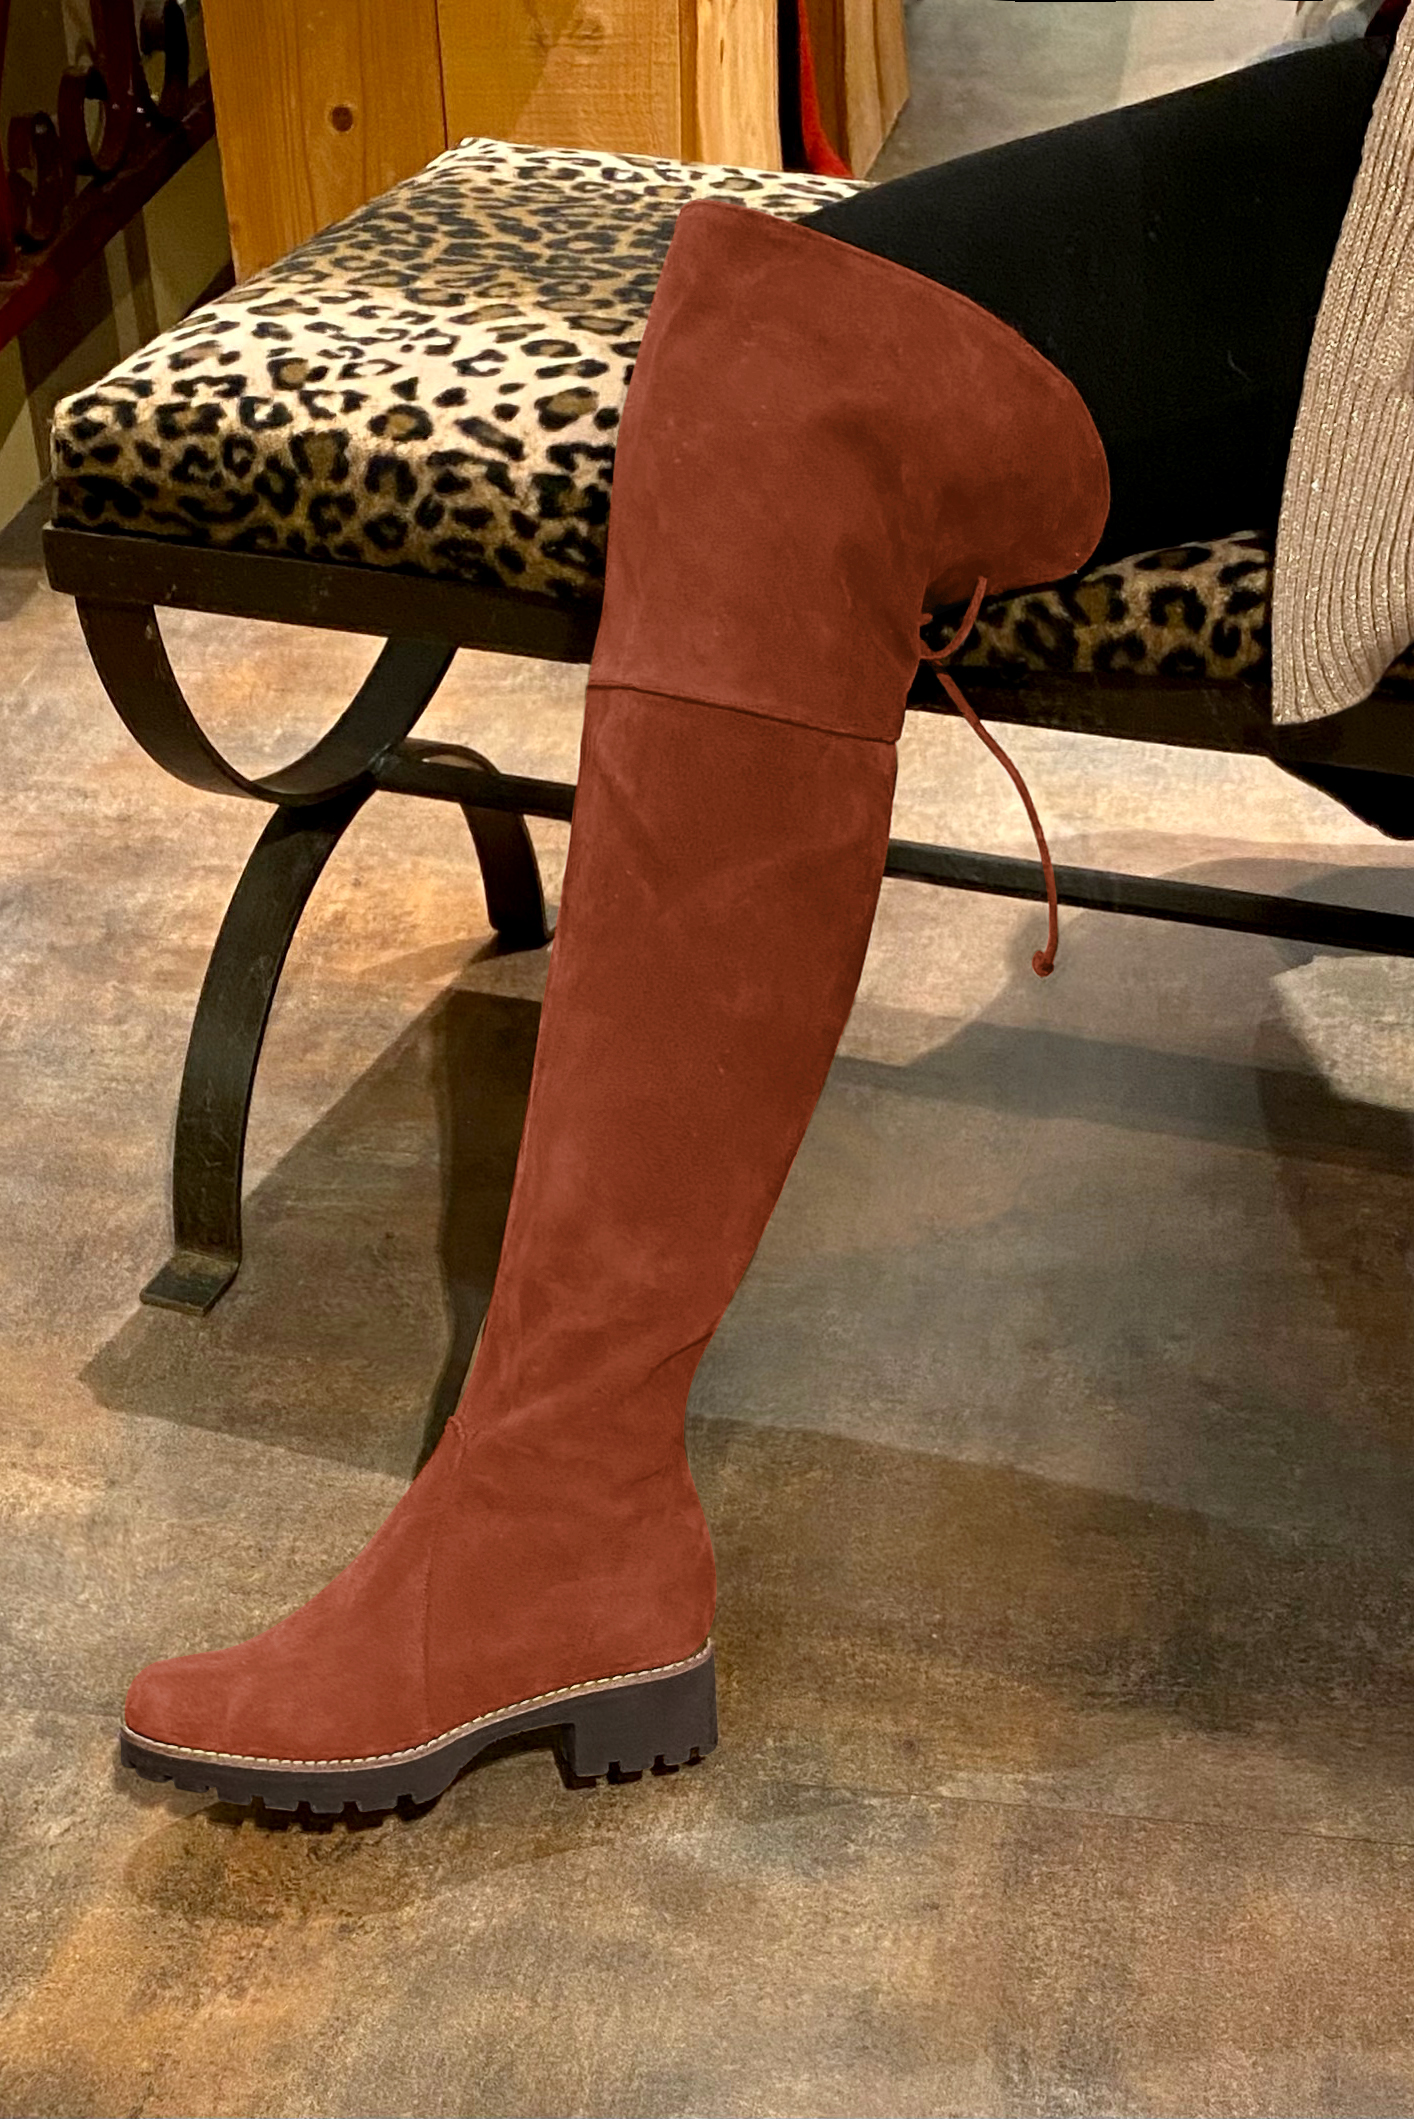 Terracotta orange women's leather thigh-high boots. Round toe. Low rubber soles. Made to measure. Worn view - Florence KOOIJMAN